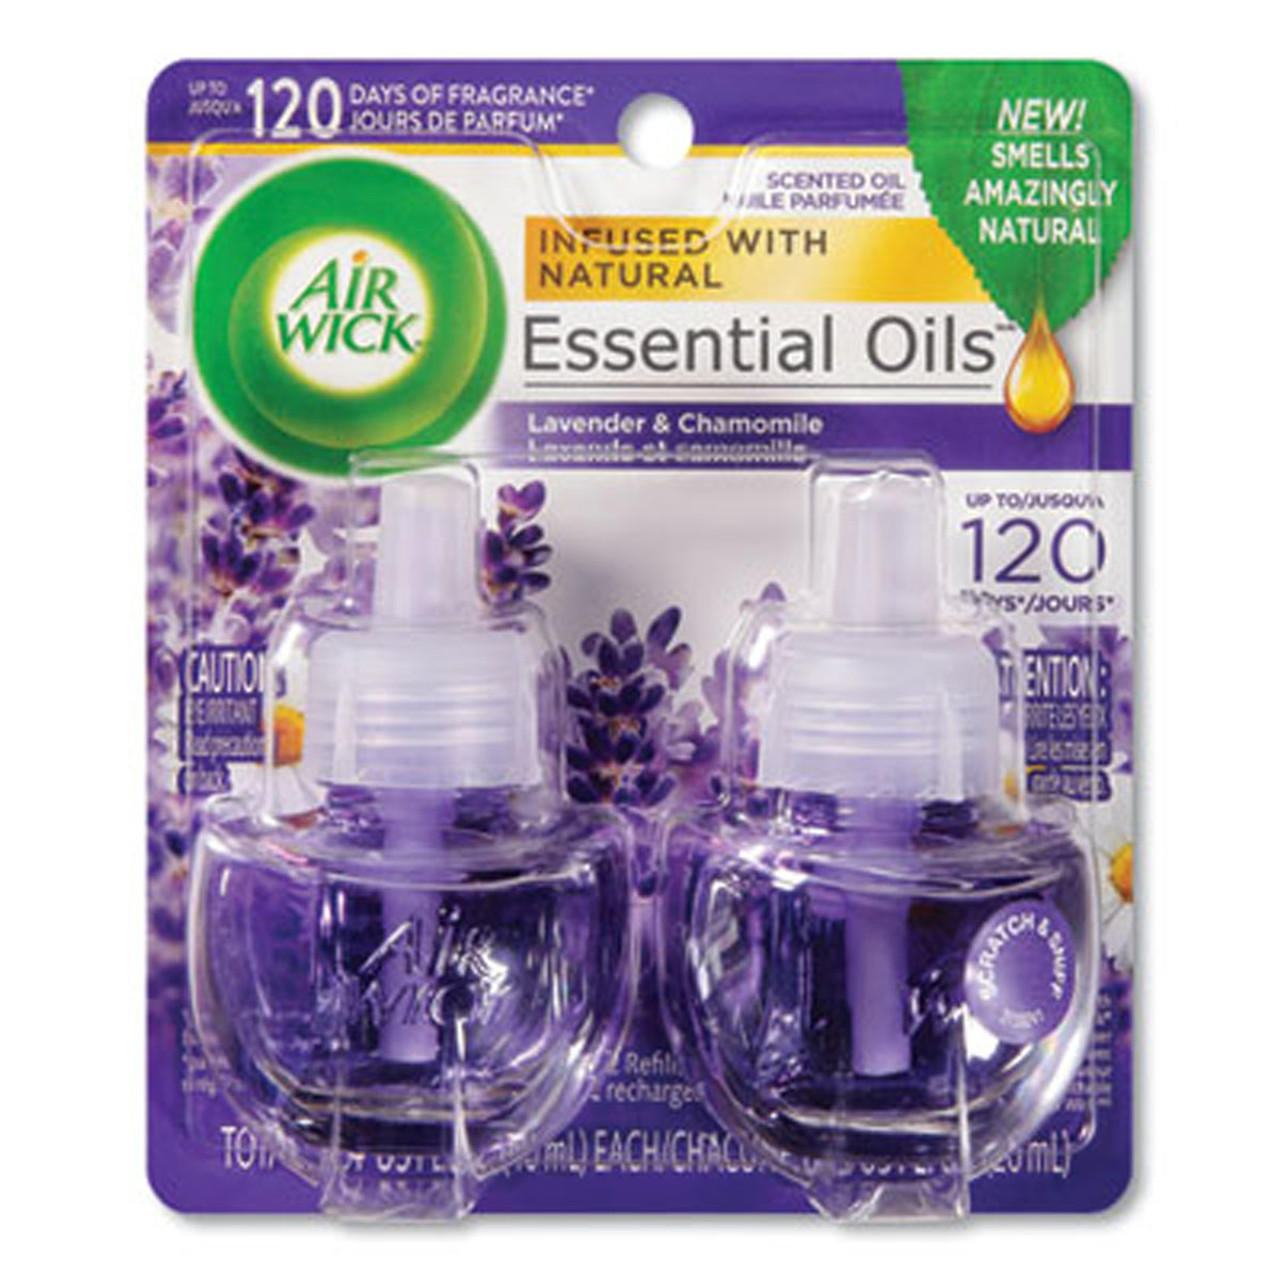 Air Wick Scented Oil Air Freshener Warmer, 1 ct